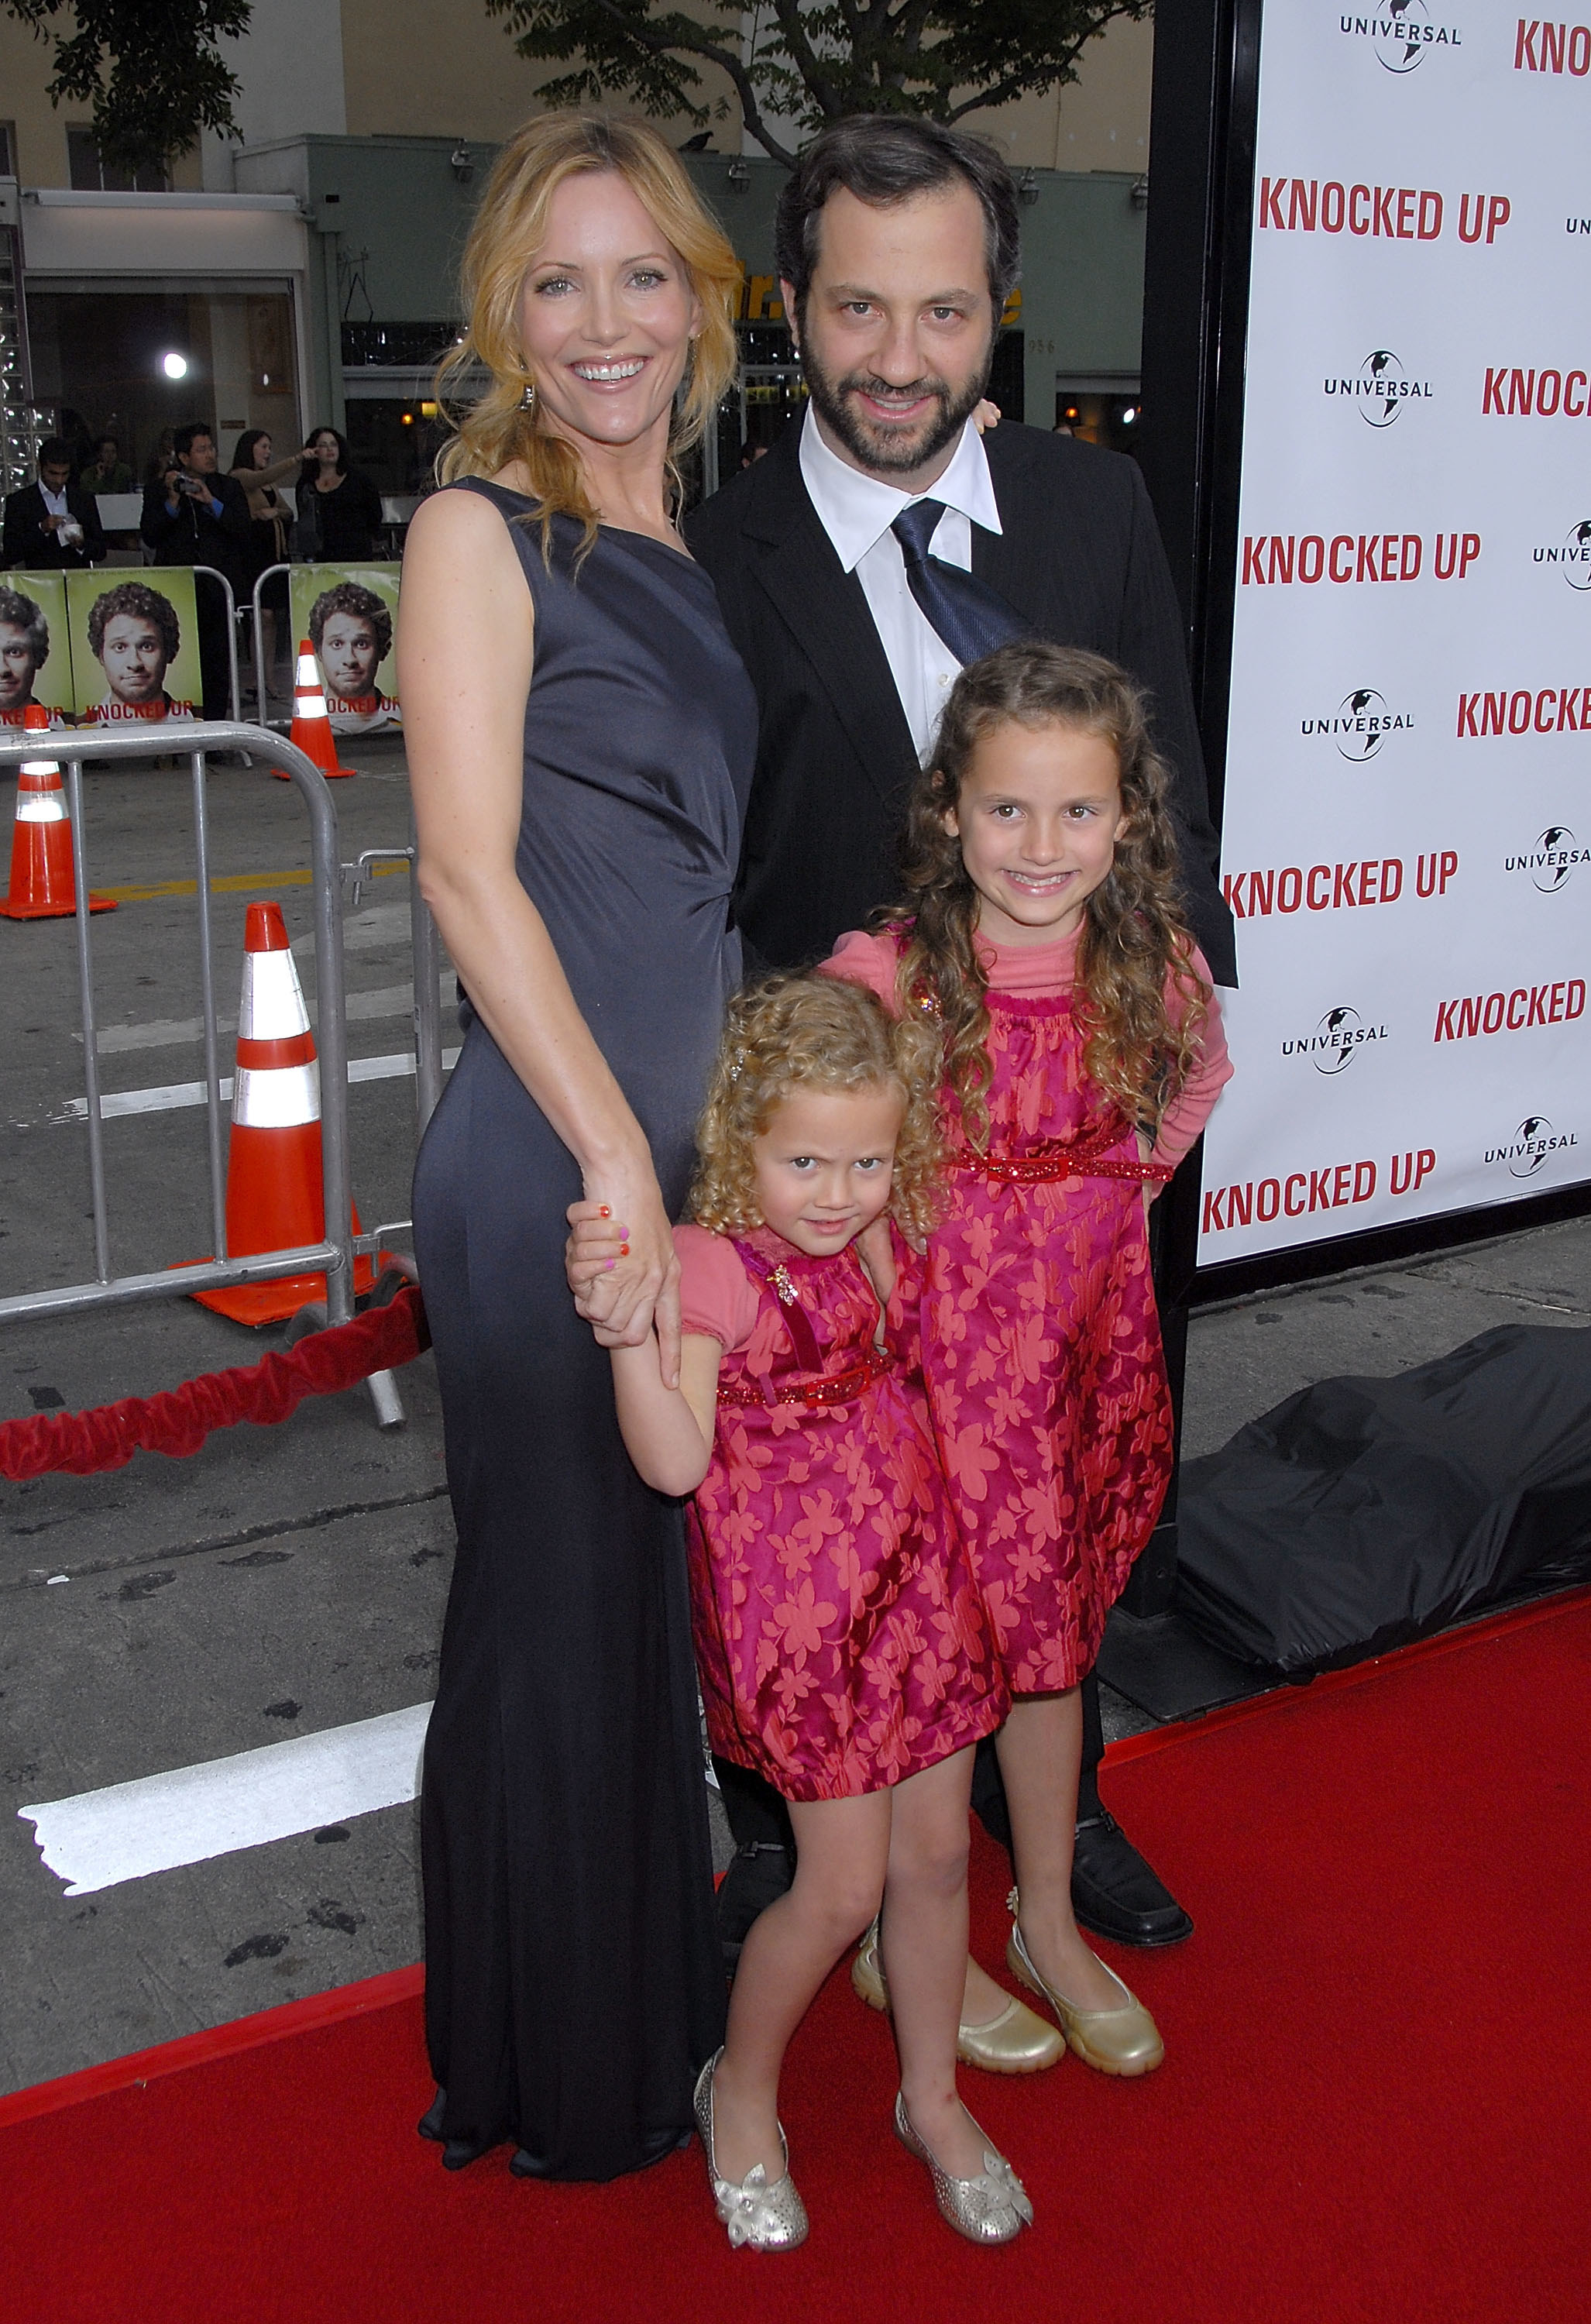 the young sisters on the red carpet